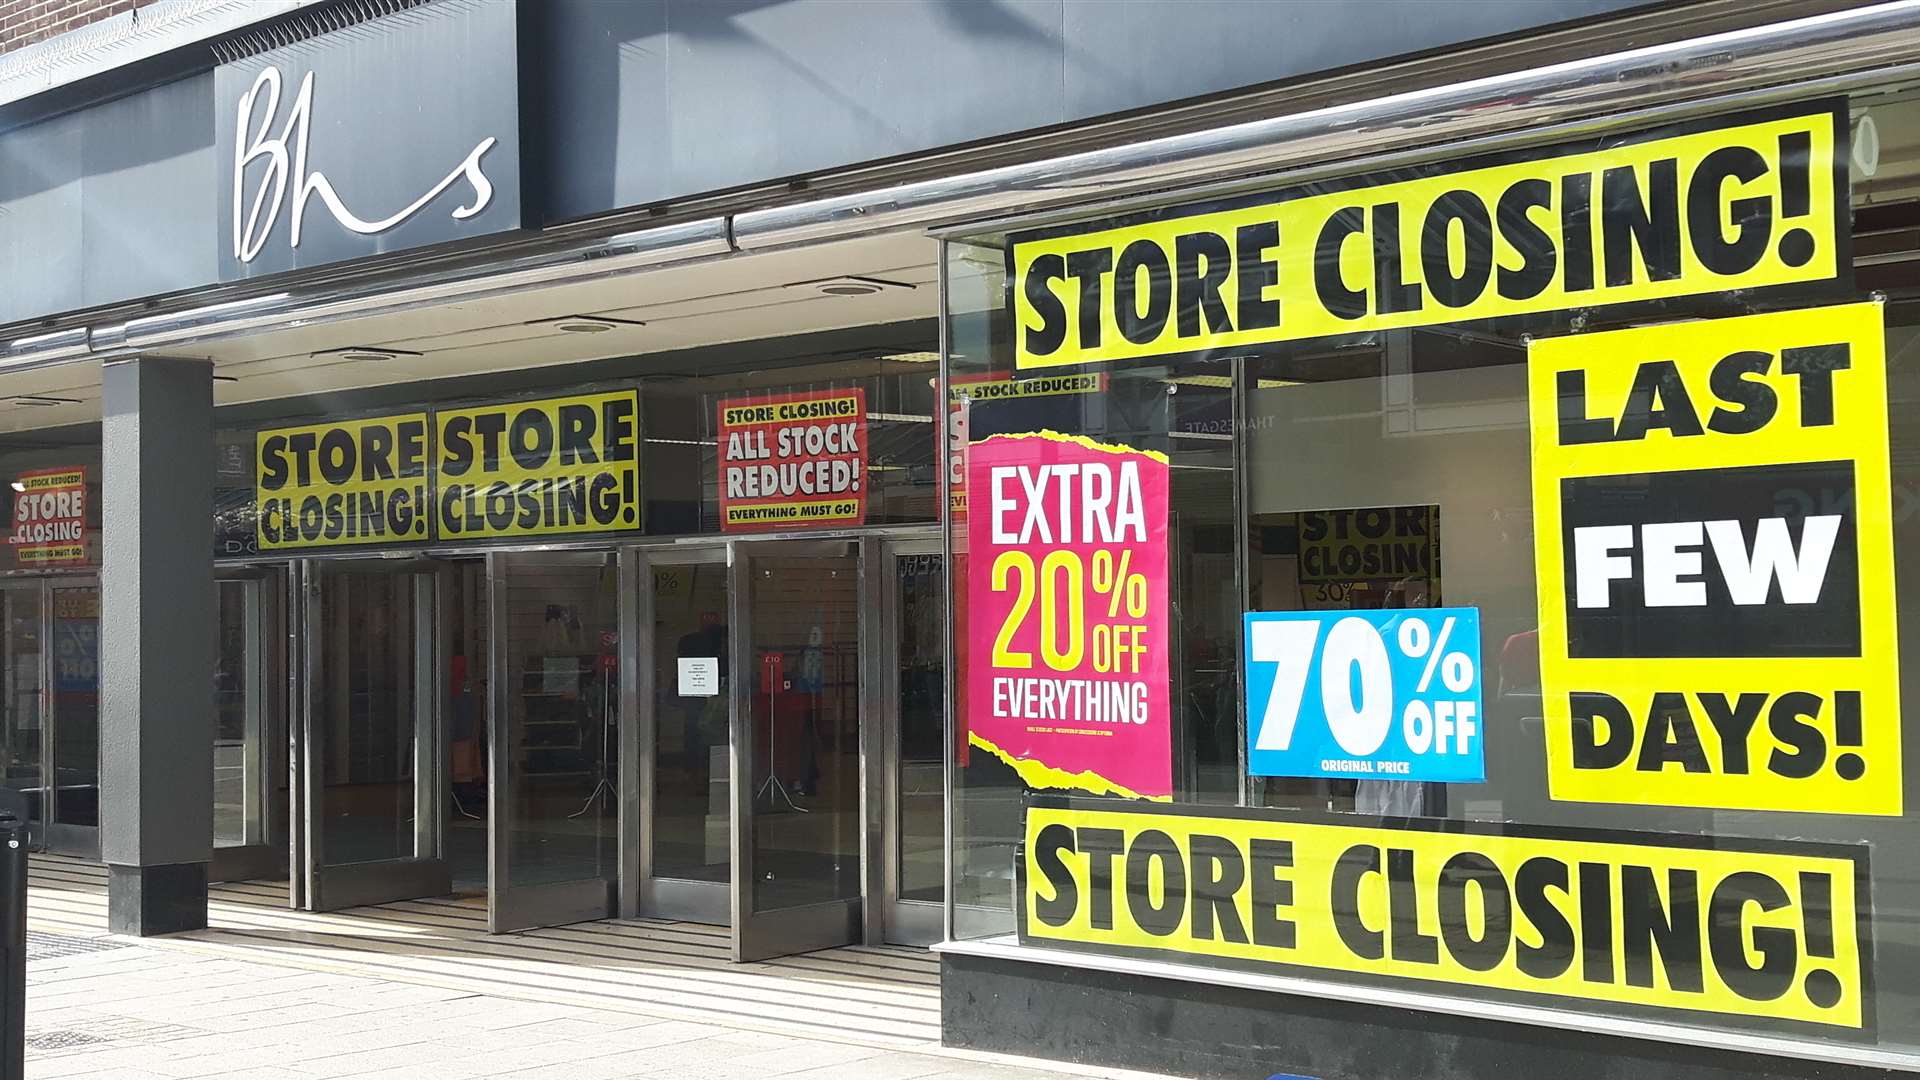 Gravesend BHS will close this Saturday